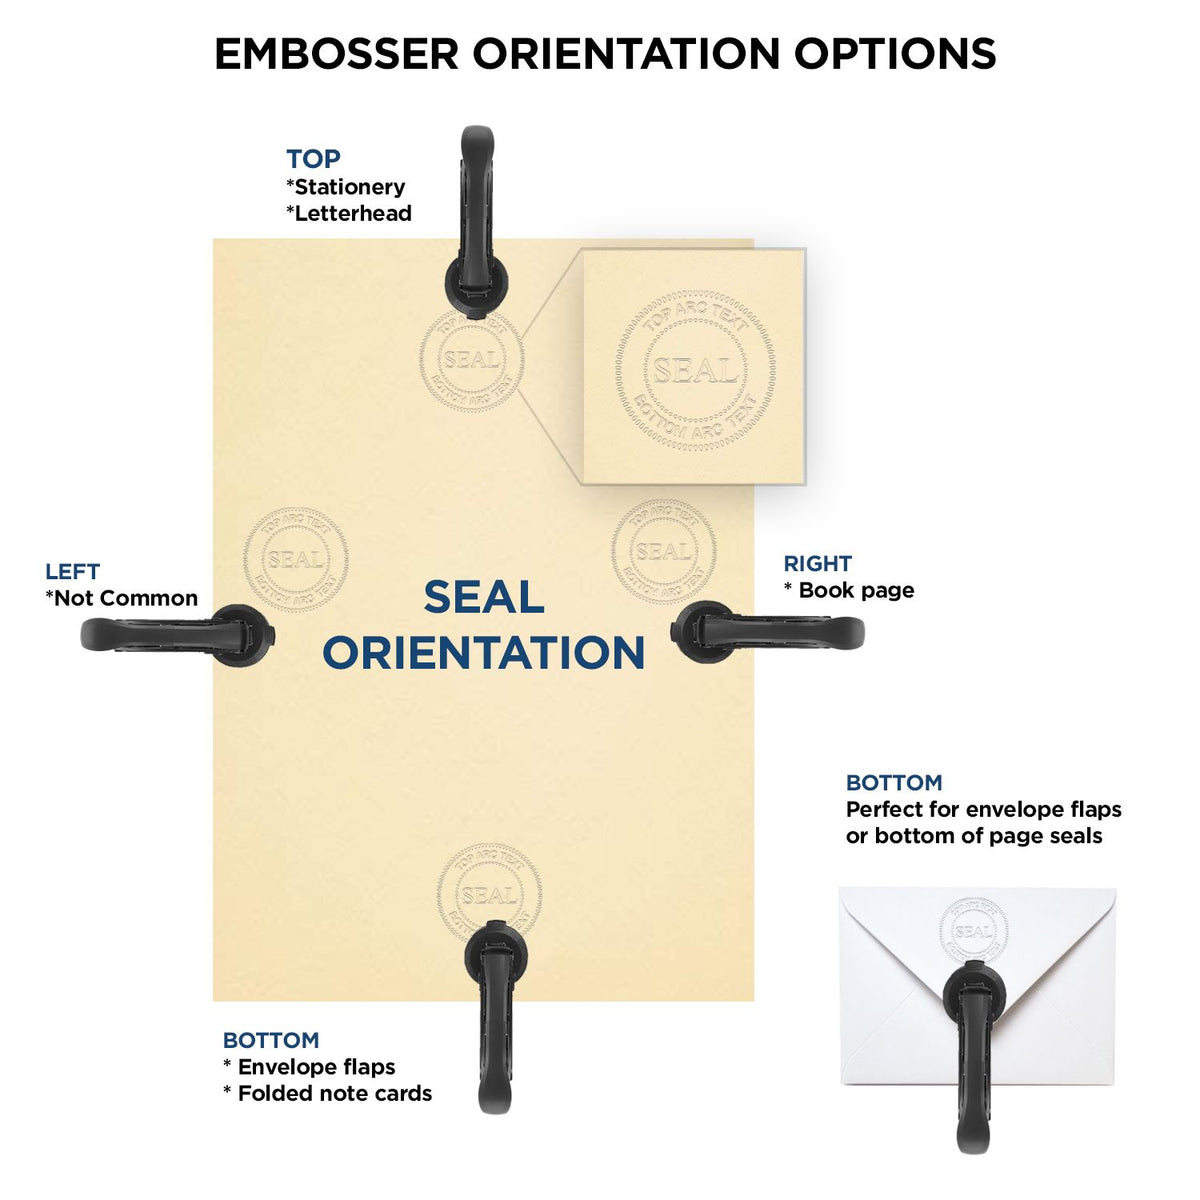 An infographic for the Gift Kentucky Engineer Seal showing embosser orientation, this is showing examples of a top, bottom, right and left insert.